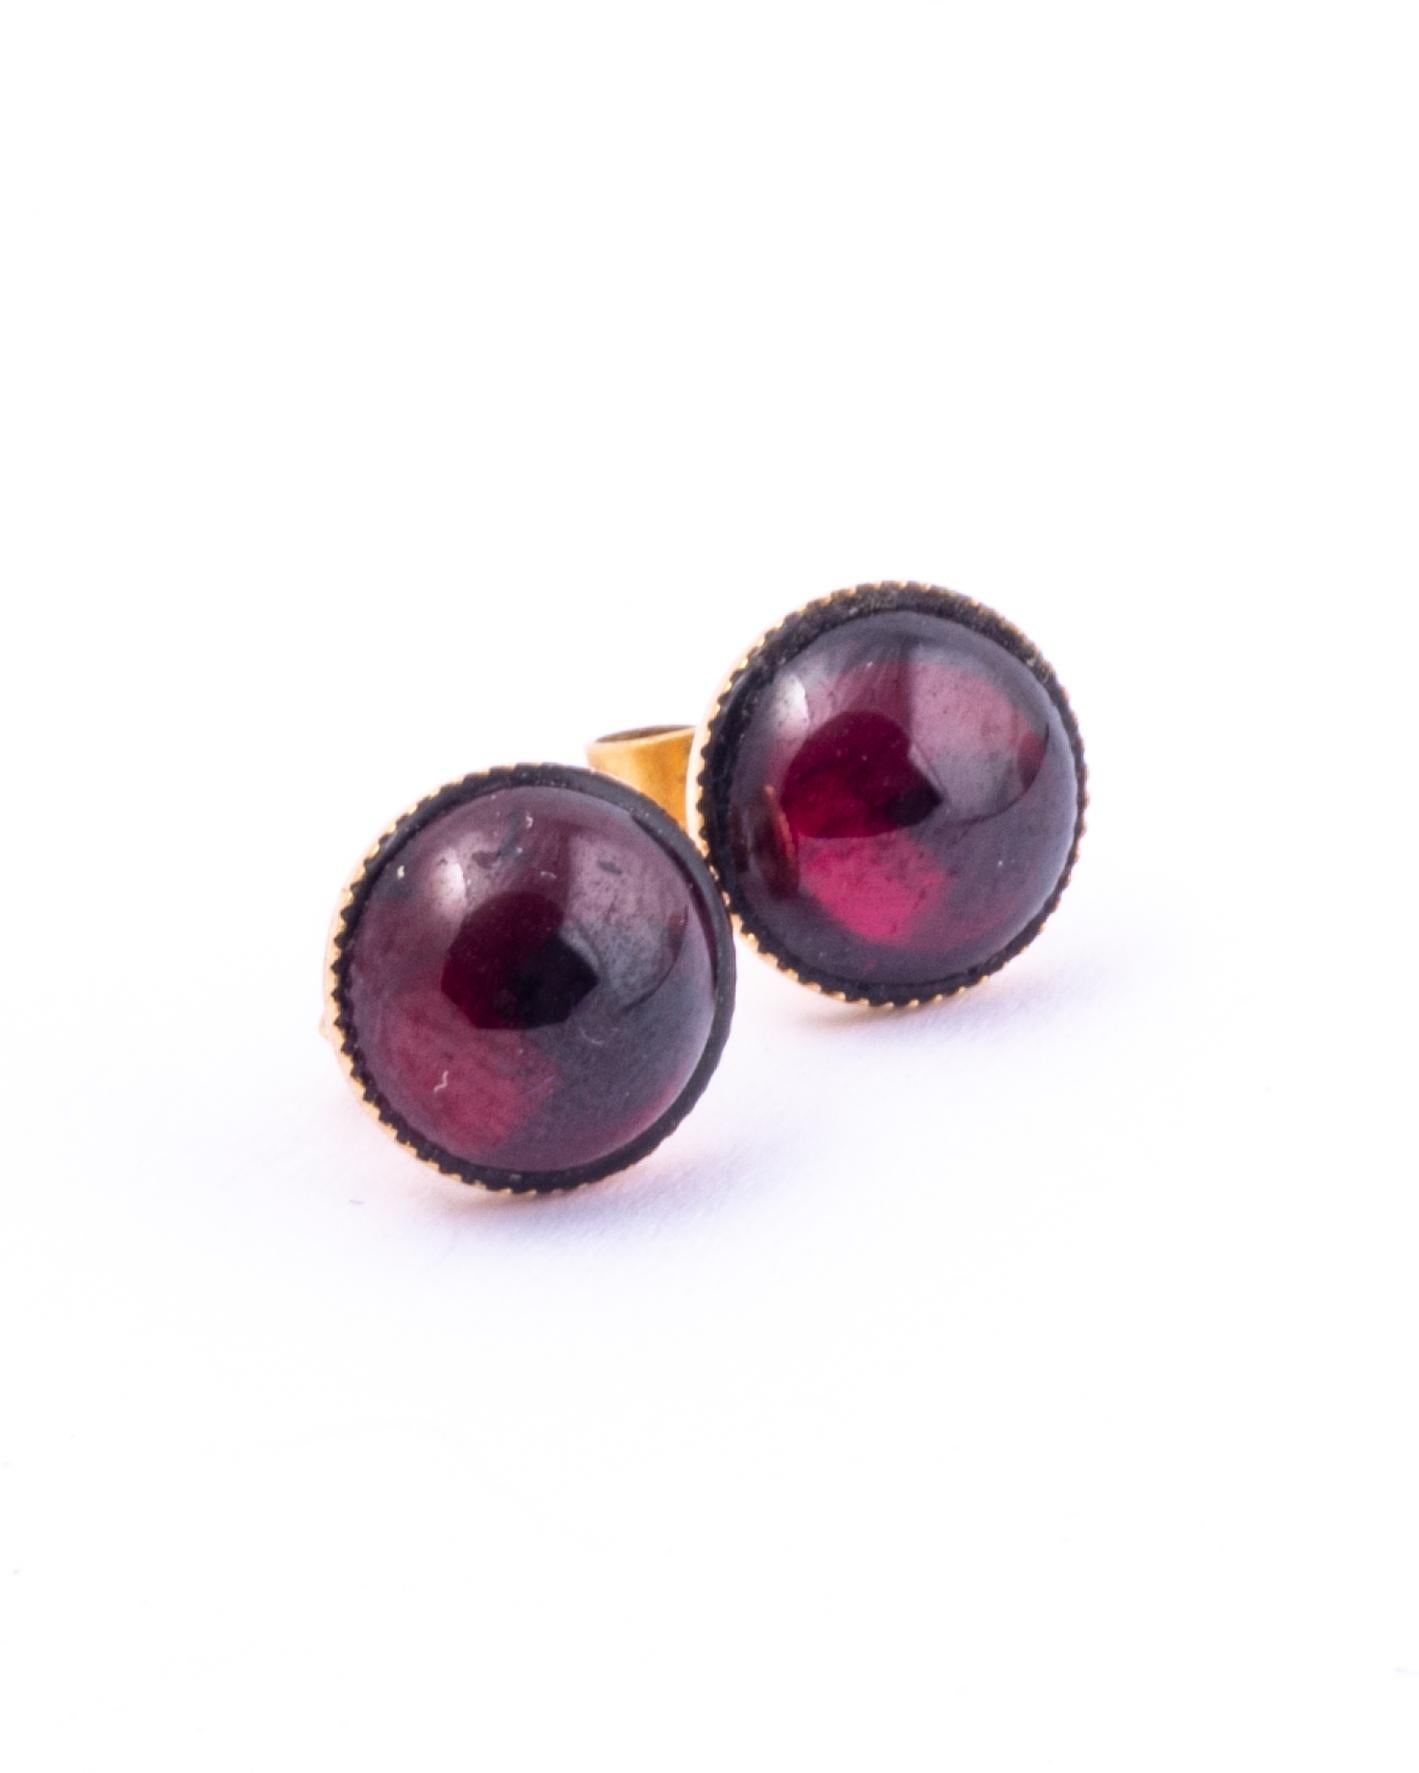 These gorgeous earrings hold smooth and glossy garnet stones set in 9carat gold. 

Stone Diameter: 8mm

Weight: 1.5g